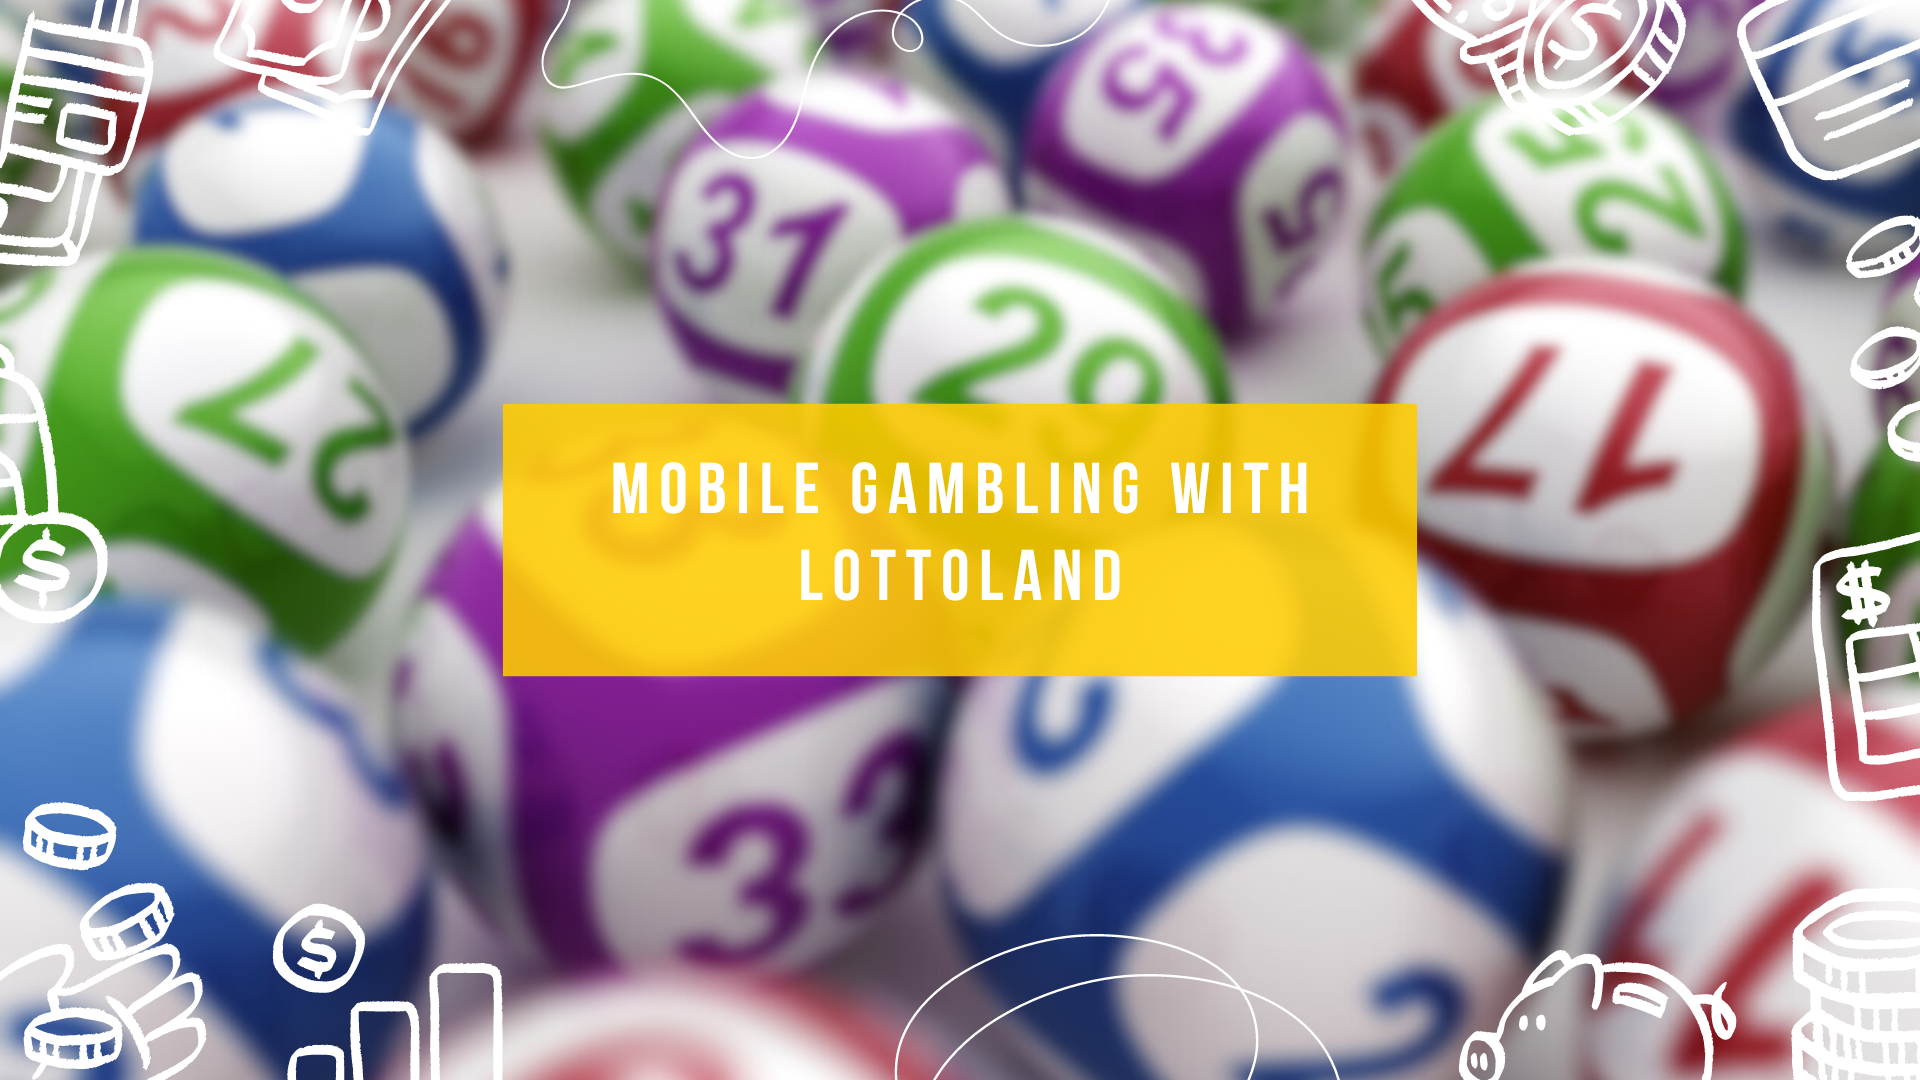 Mobile Gambling with Lottoland